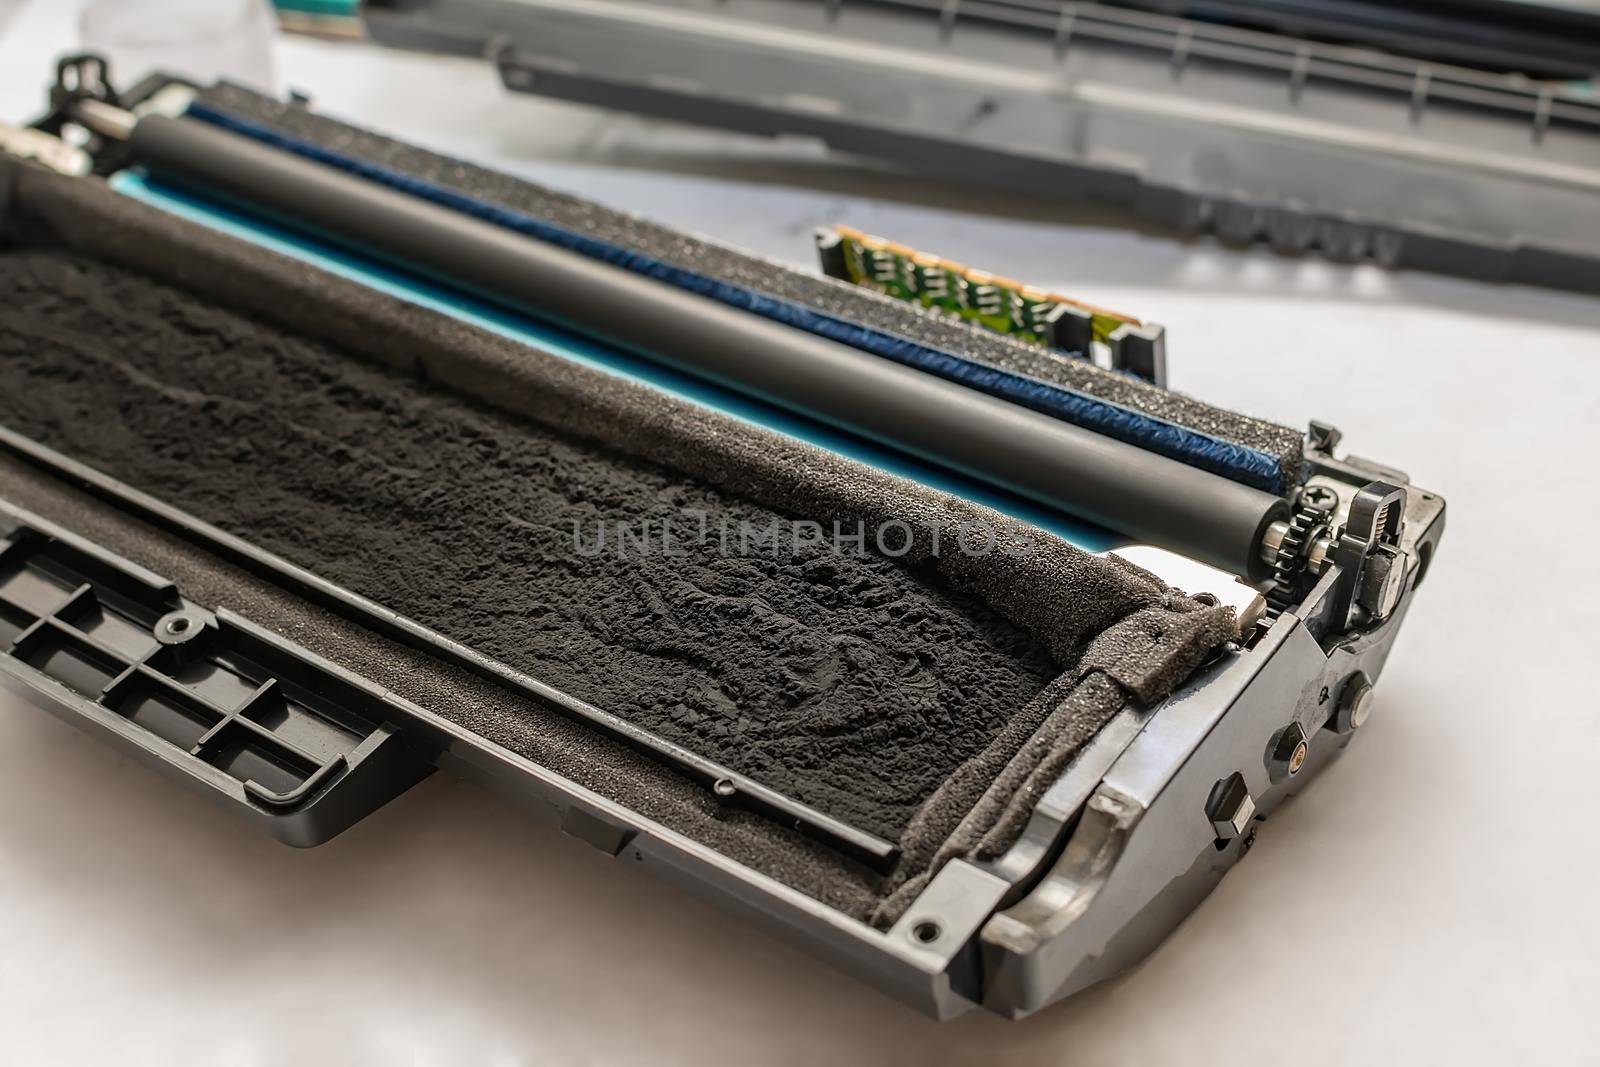 the cartridge from the laser printer, filled with toner by jk3030